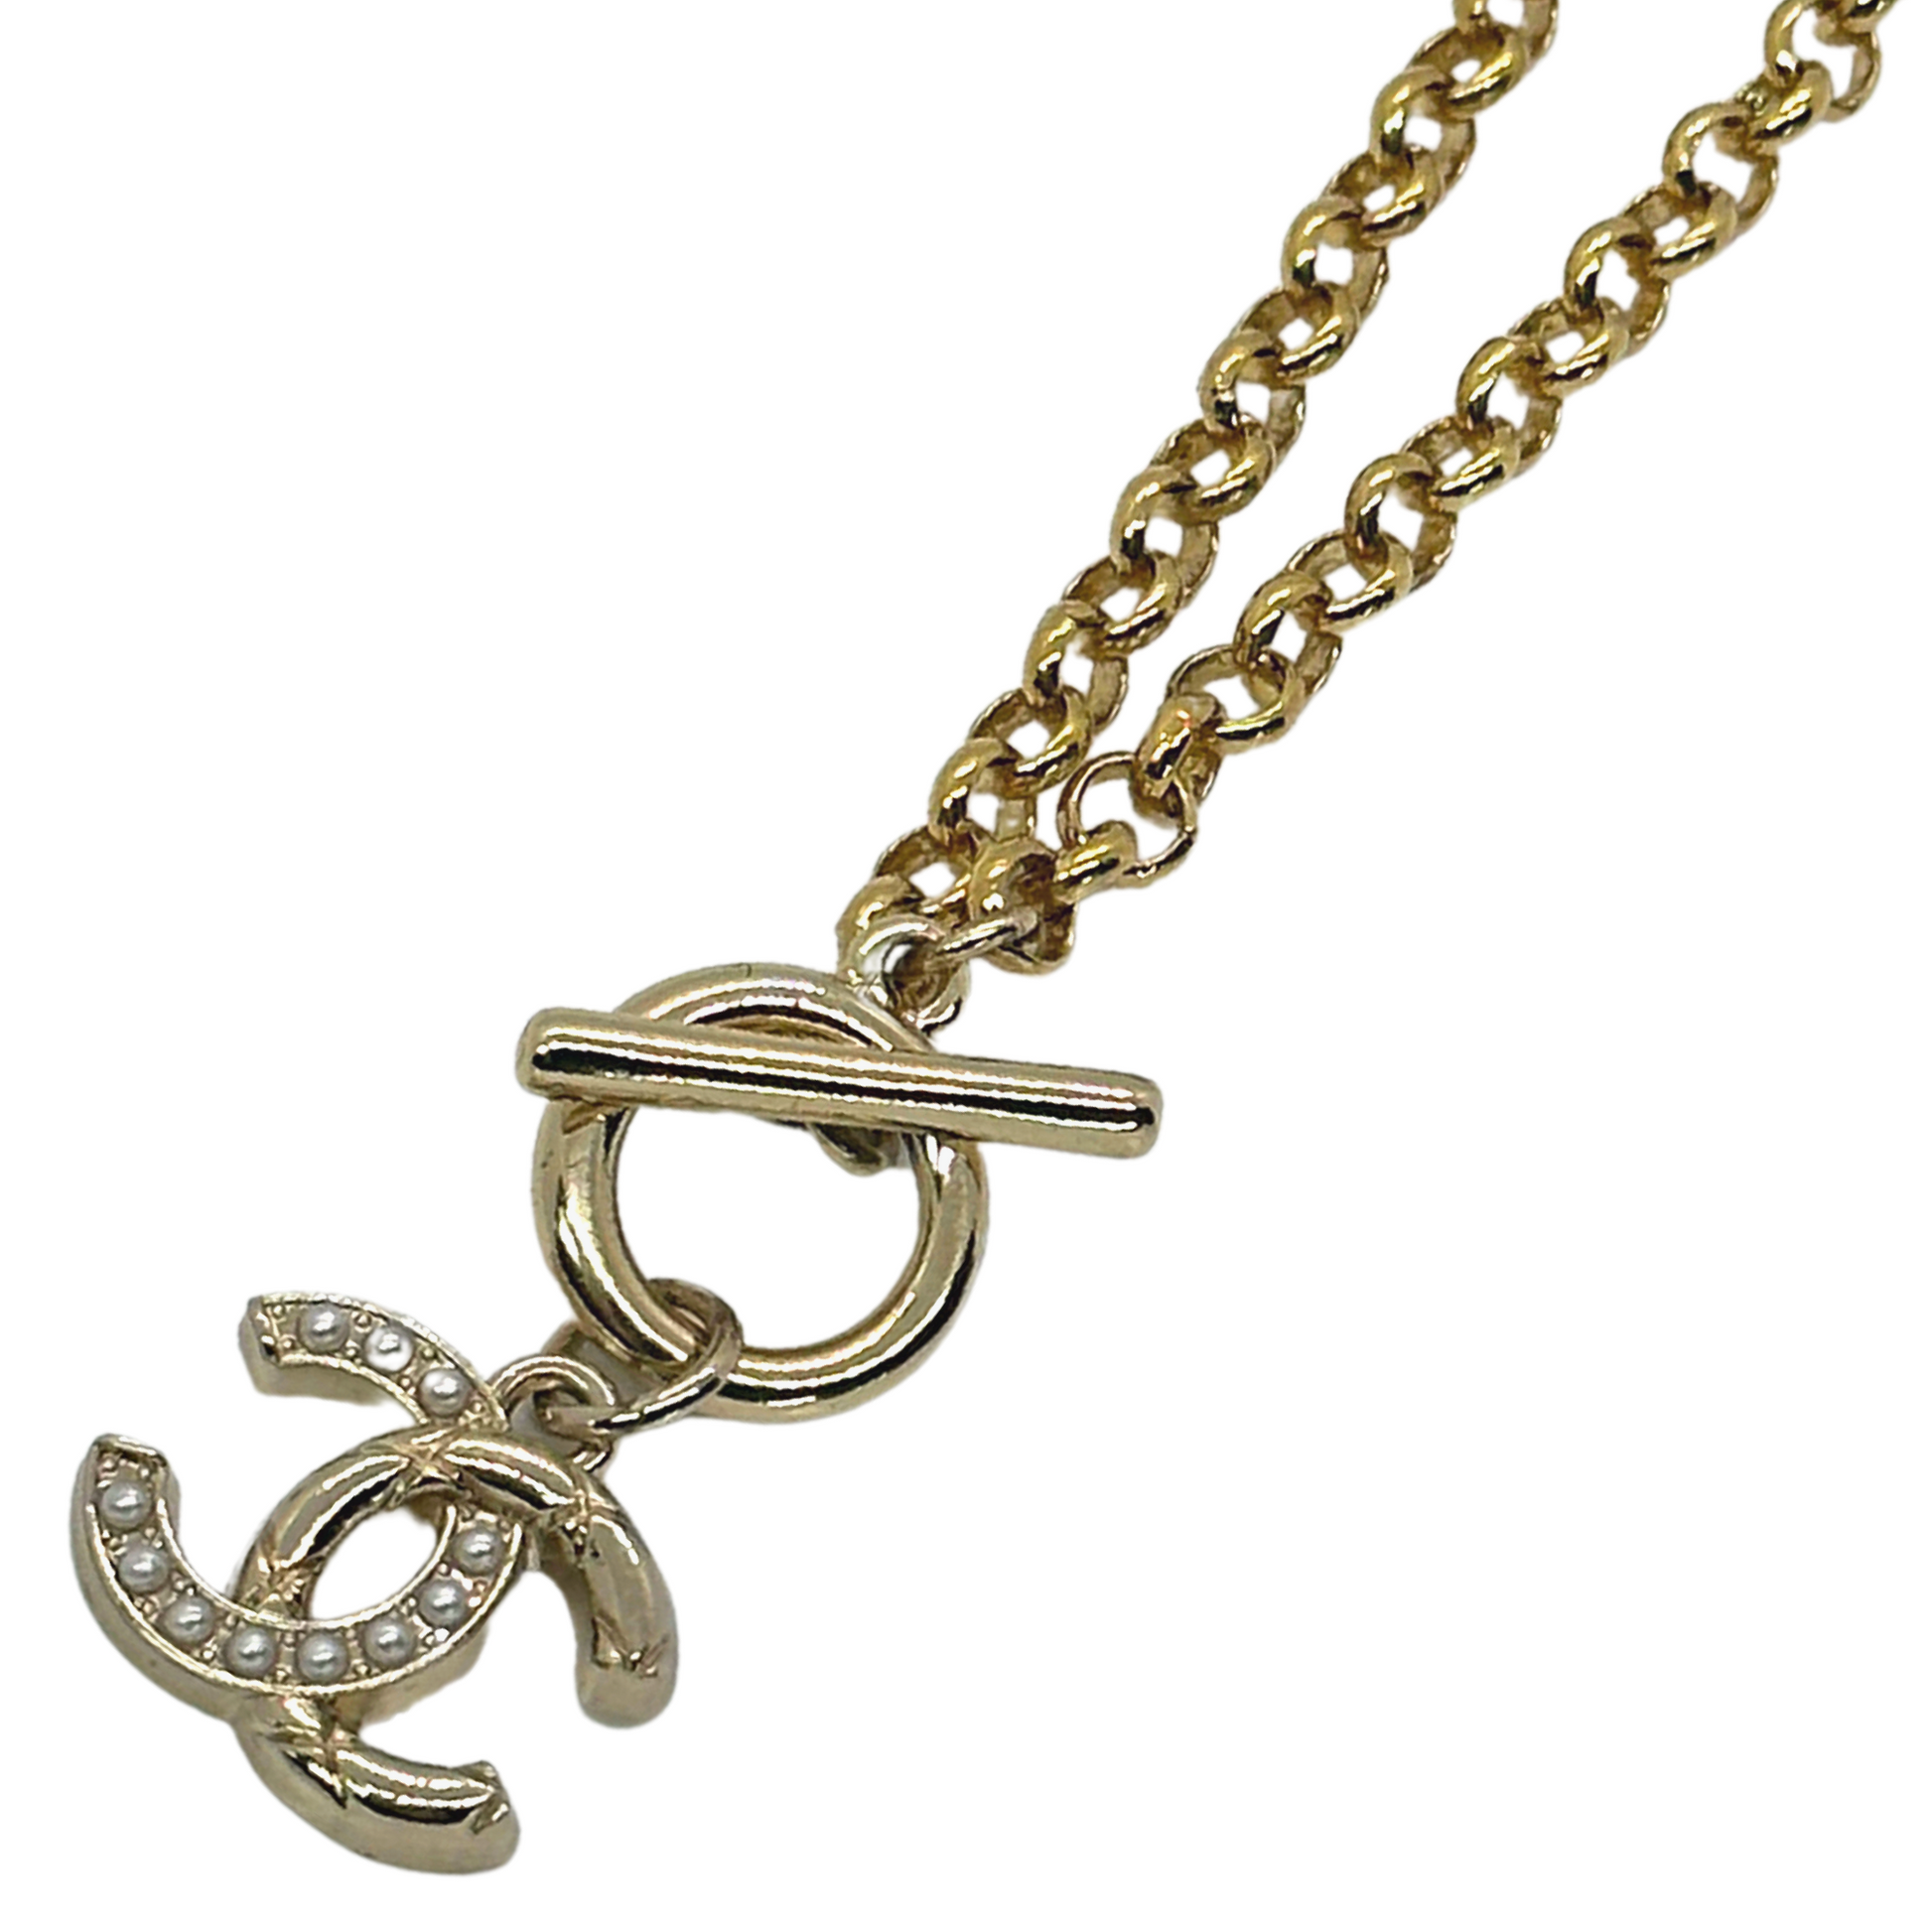 Authentic Chanel Half Faux Pearl Pendant | Reworked Gold 16 Necklace